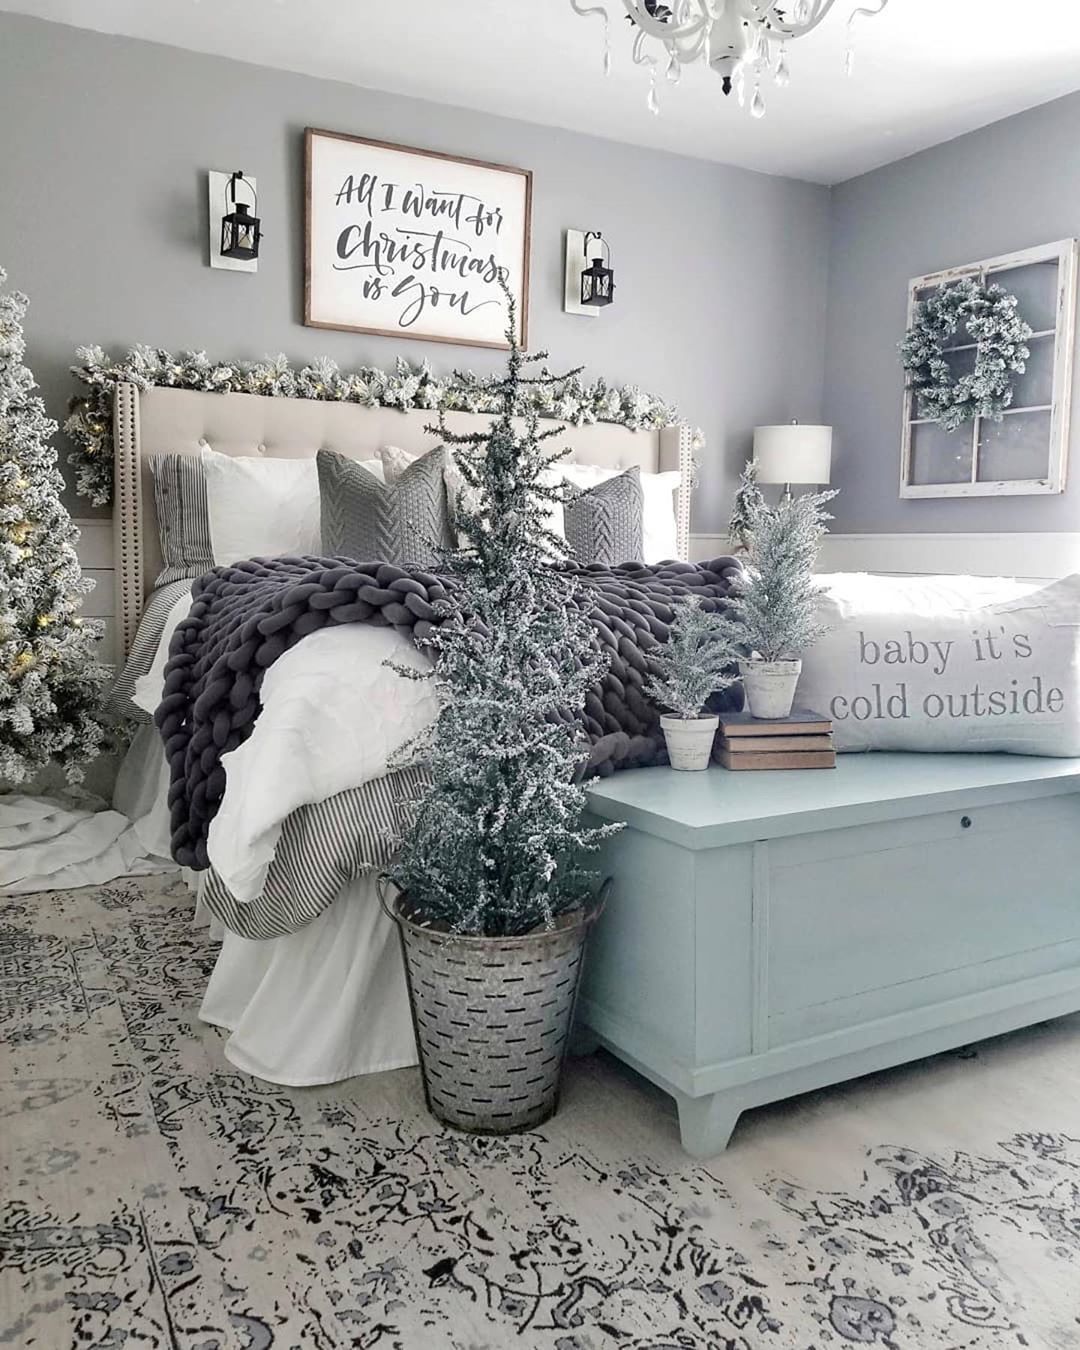 Top 37 Christmas Bedroom Decorations Ideas 2020 - Page 16 of 37 - newyearlights. com -   16 christmas decor for bedroom ideas